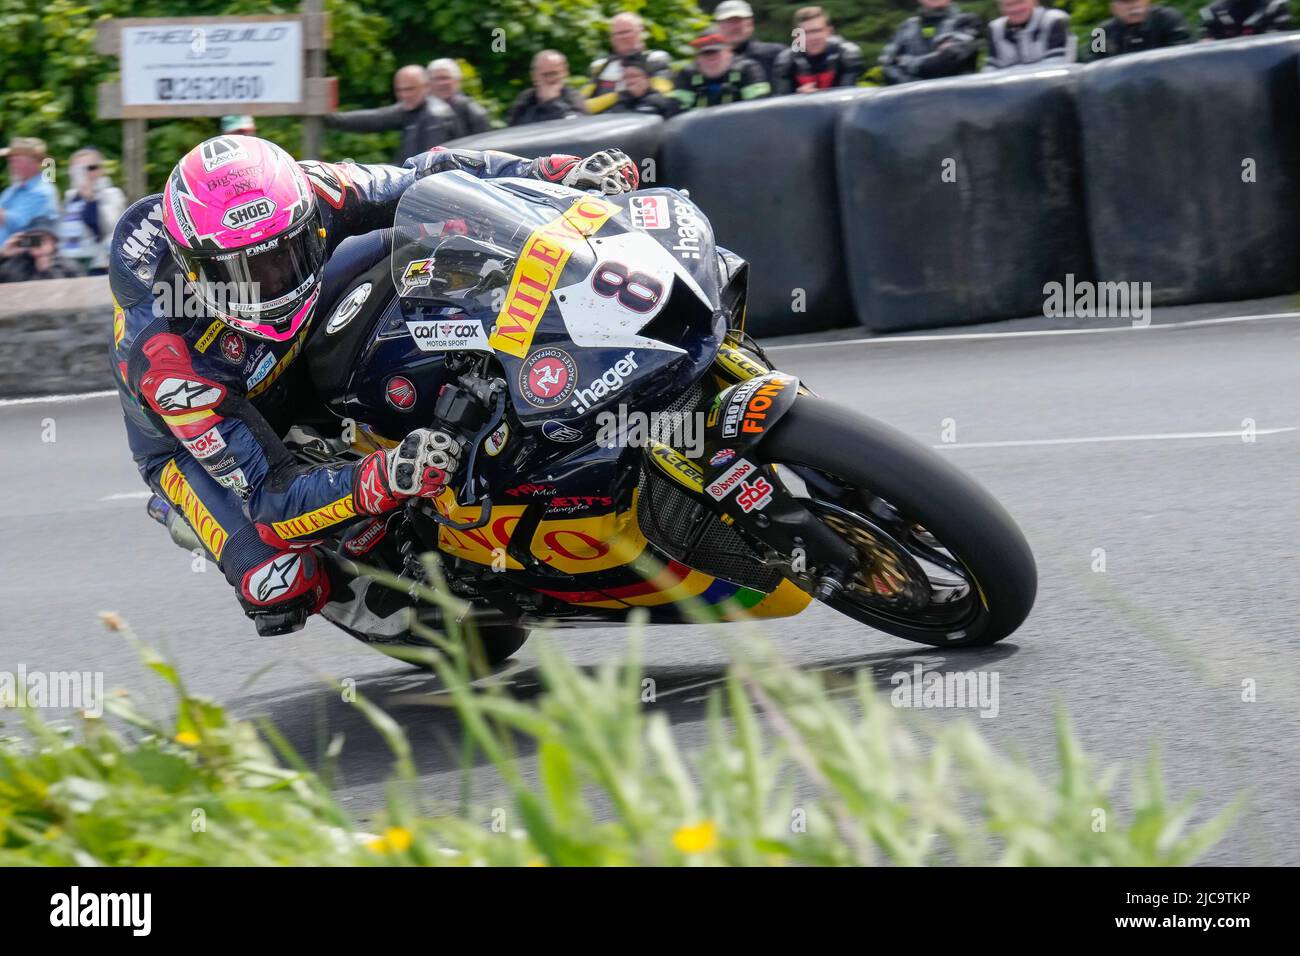 Douglas, Isle Of Man. 11th June, 2022. Davey Todd (1000 Honda) representing the Milenco by Padgett's Motorcycles team during the 2022 Milwaukee Senior TT at the Isle of Man, Douglas, Isle of Man on the 11 June 2022. Photo by David Horn. Credit: PRiME Media Images/Alamy Live News Stock Photo